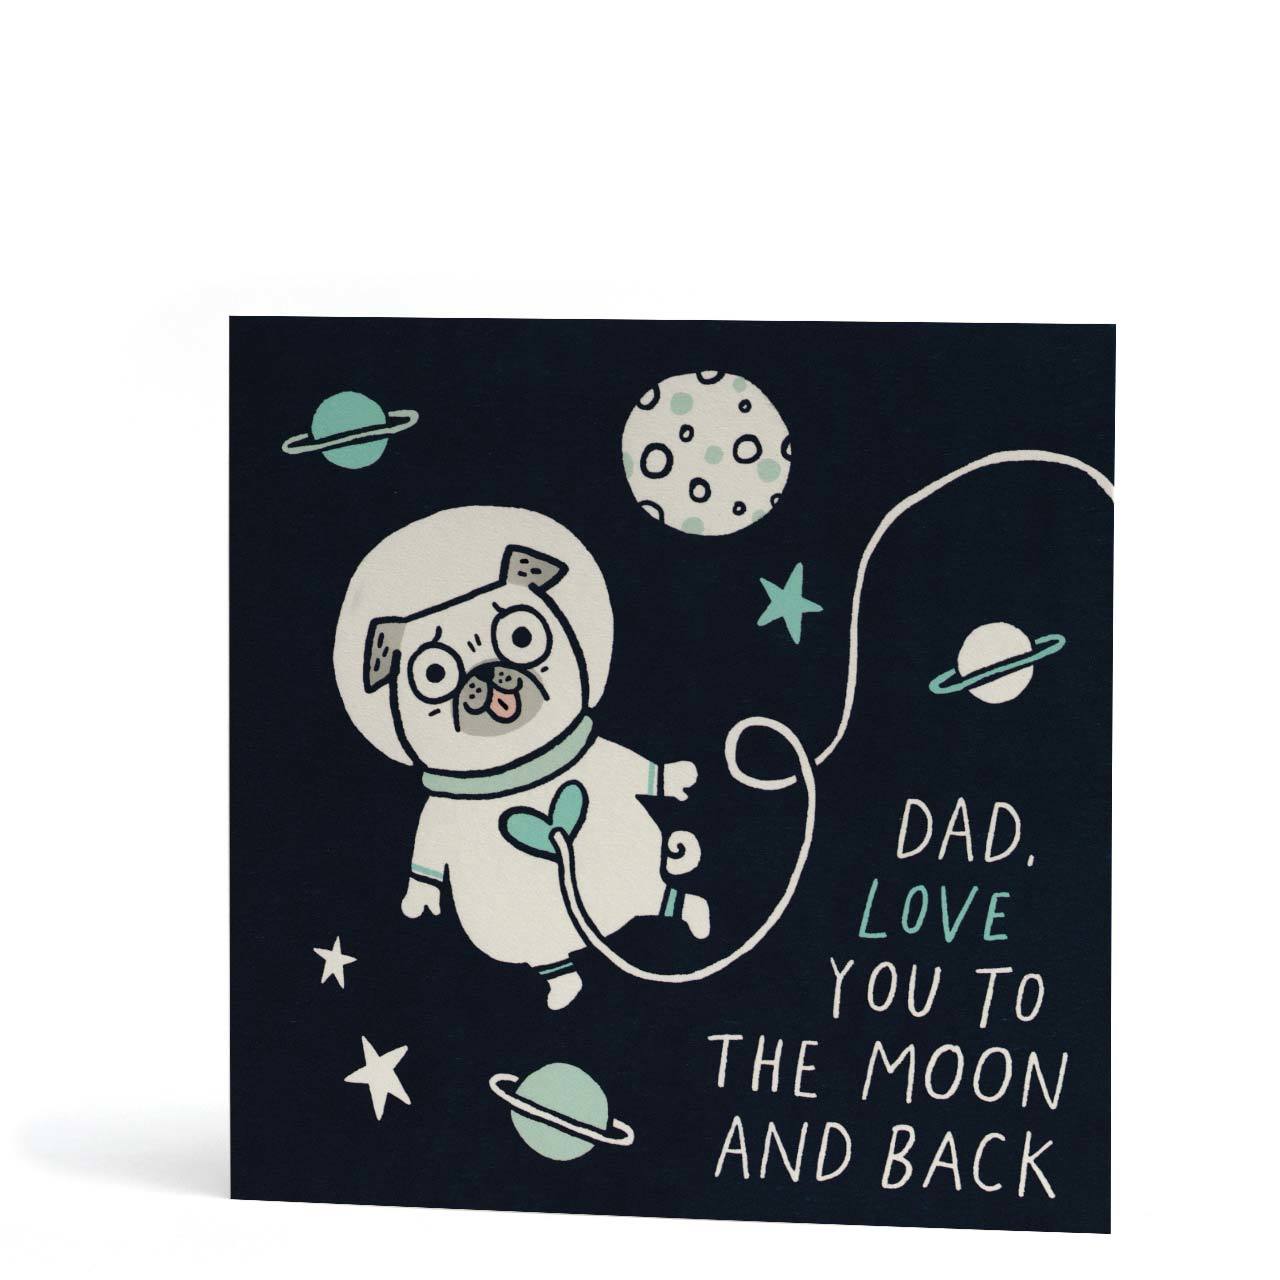 Dad, Love You To The Moon and Back Greeting Card